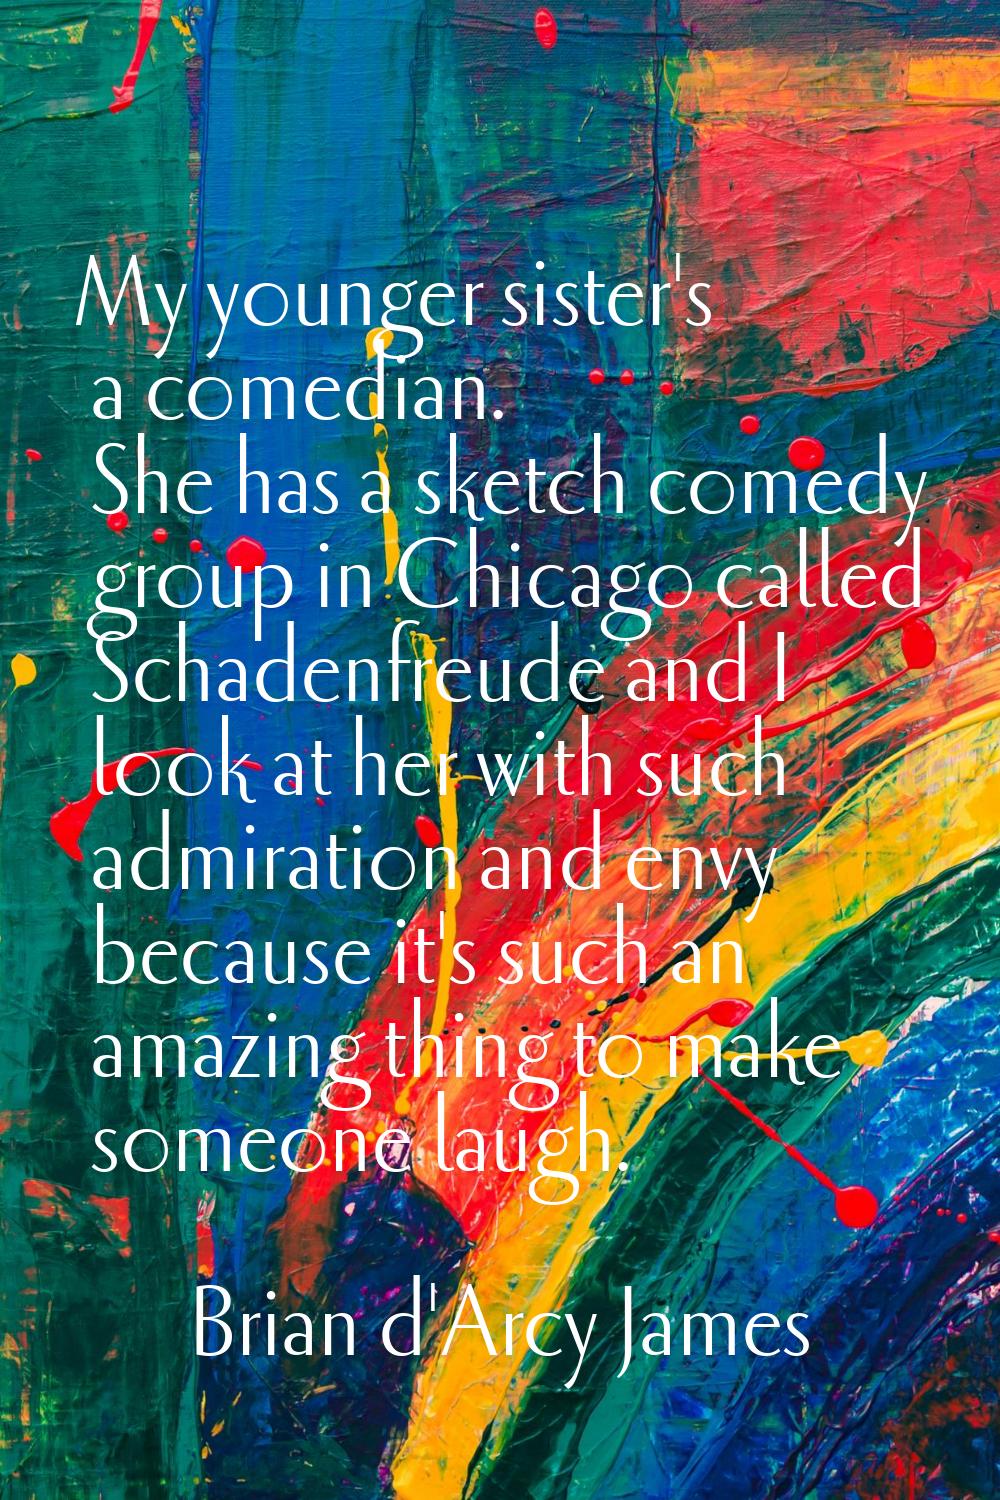 My younger sister's a comedian. She has a sketch comedy group in Chicago called Schadenfreude and I